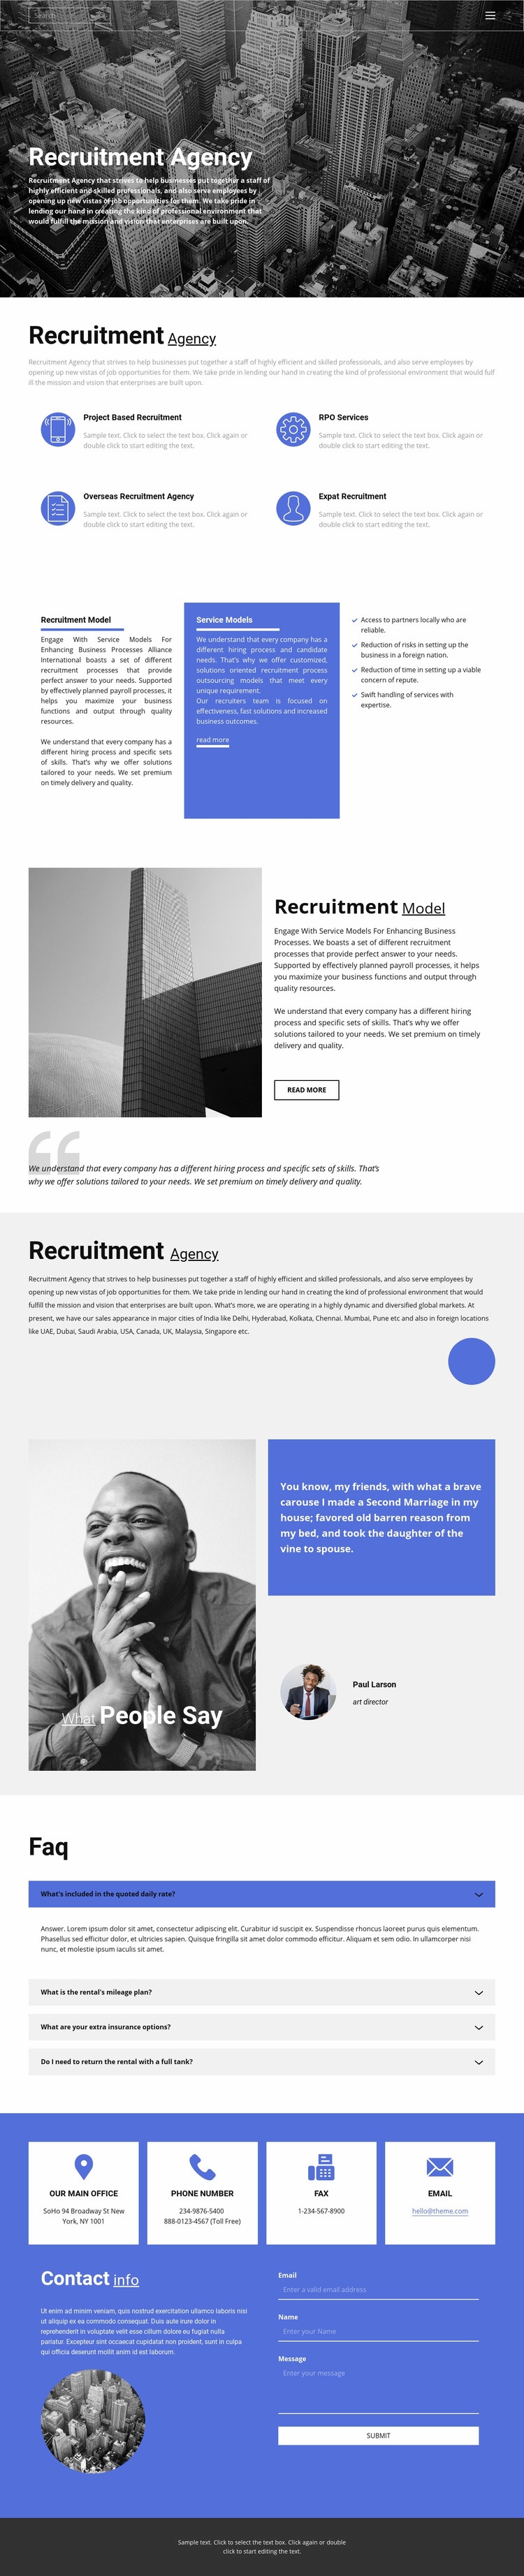 Recruiting agency with good experience Web Page Design